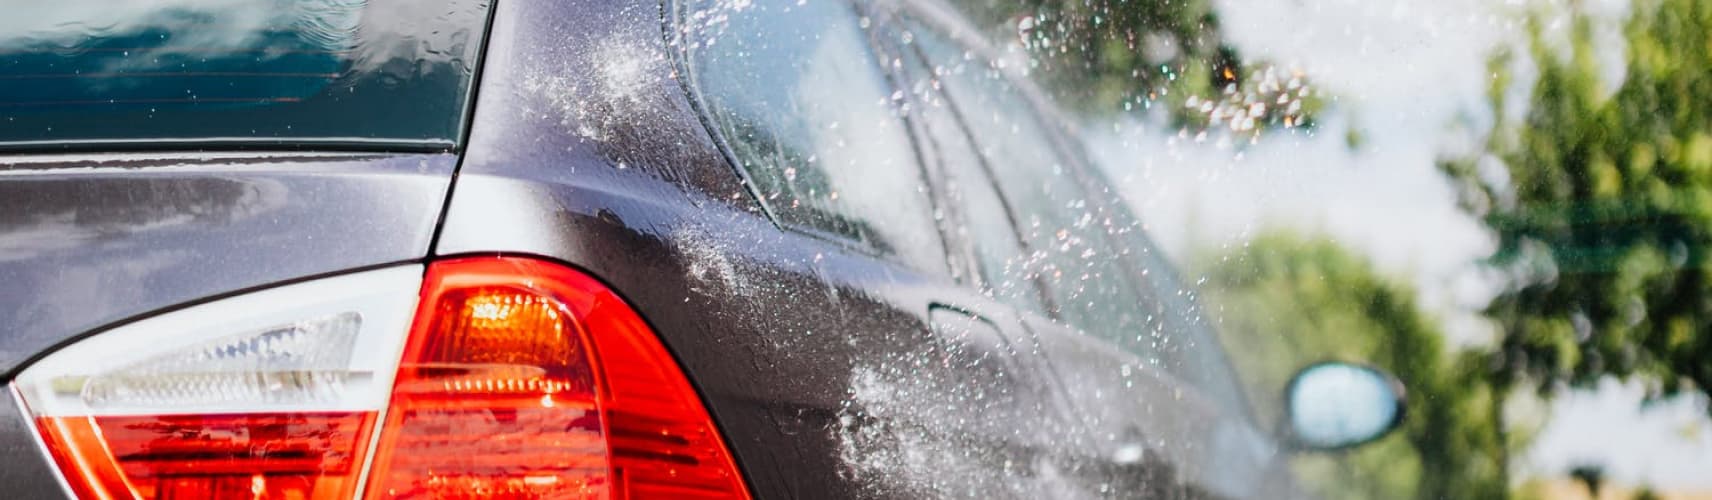 Buyers Guide to using All-Purpose Cleaner for Car Detailing - Car